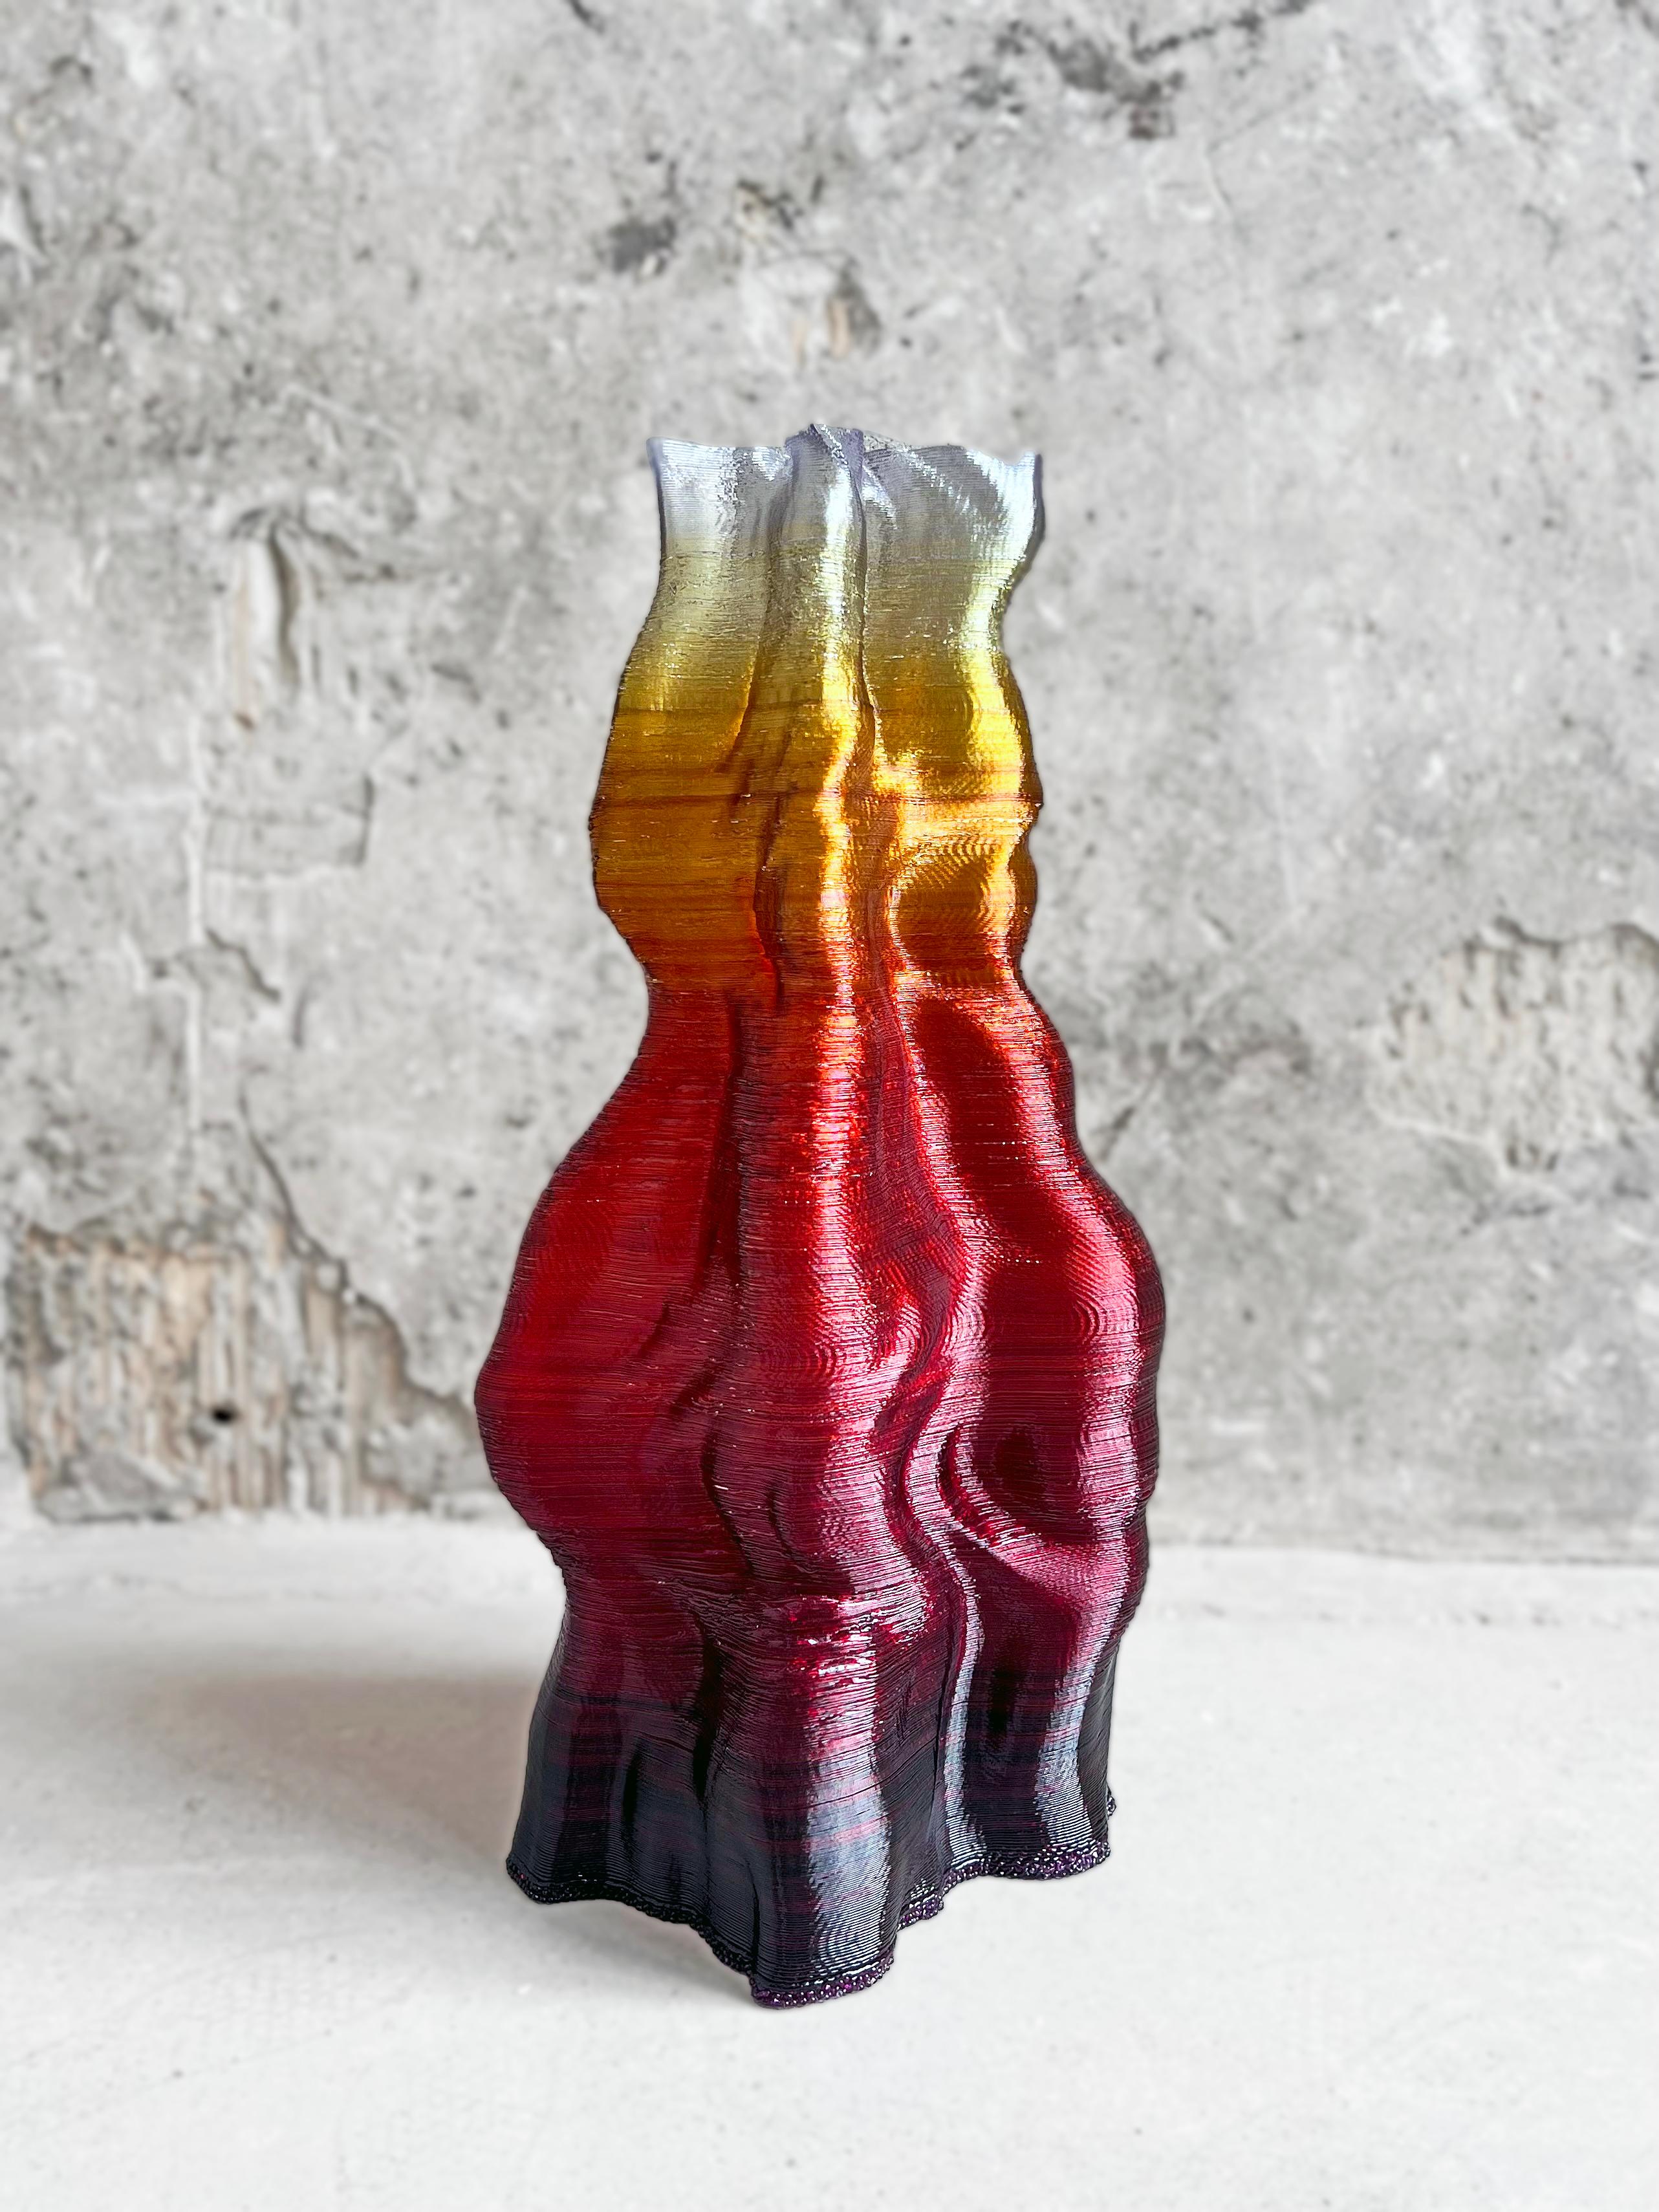 An organic-form vessel made from robotically extruded bioplastic hand-dyed by the artist during the extrusion process. Ruga Ignis is part of an ongoing vessel series designed and fabricated in the Oak Park, IL studio of Chicago/Detroit-based artist